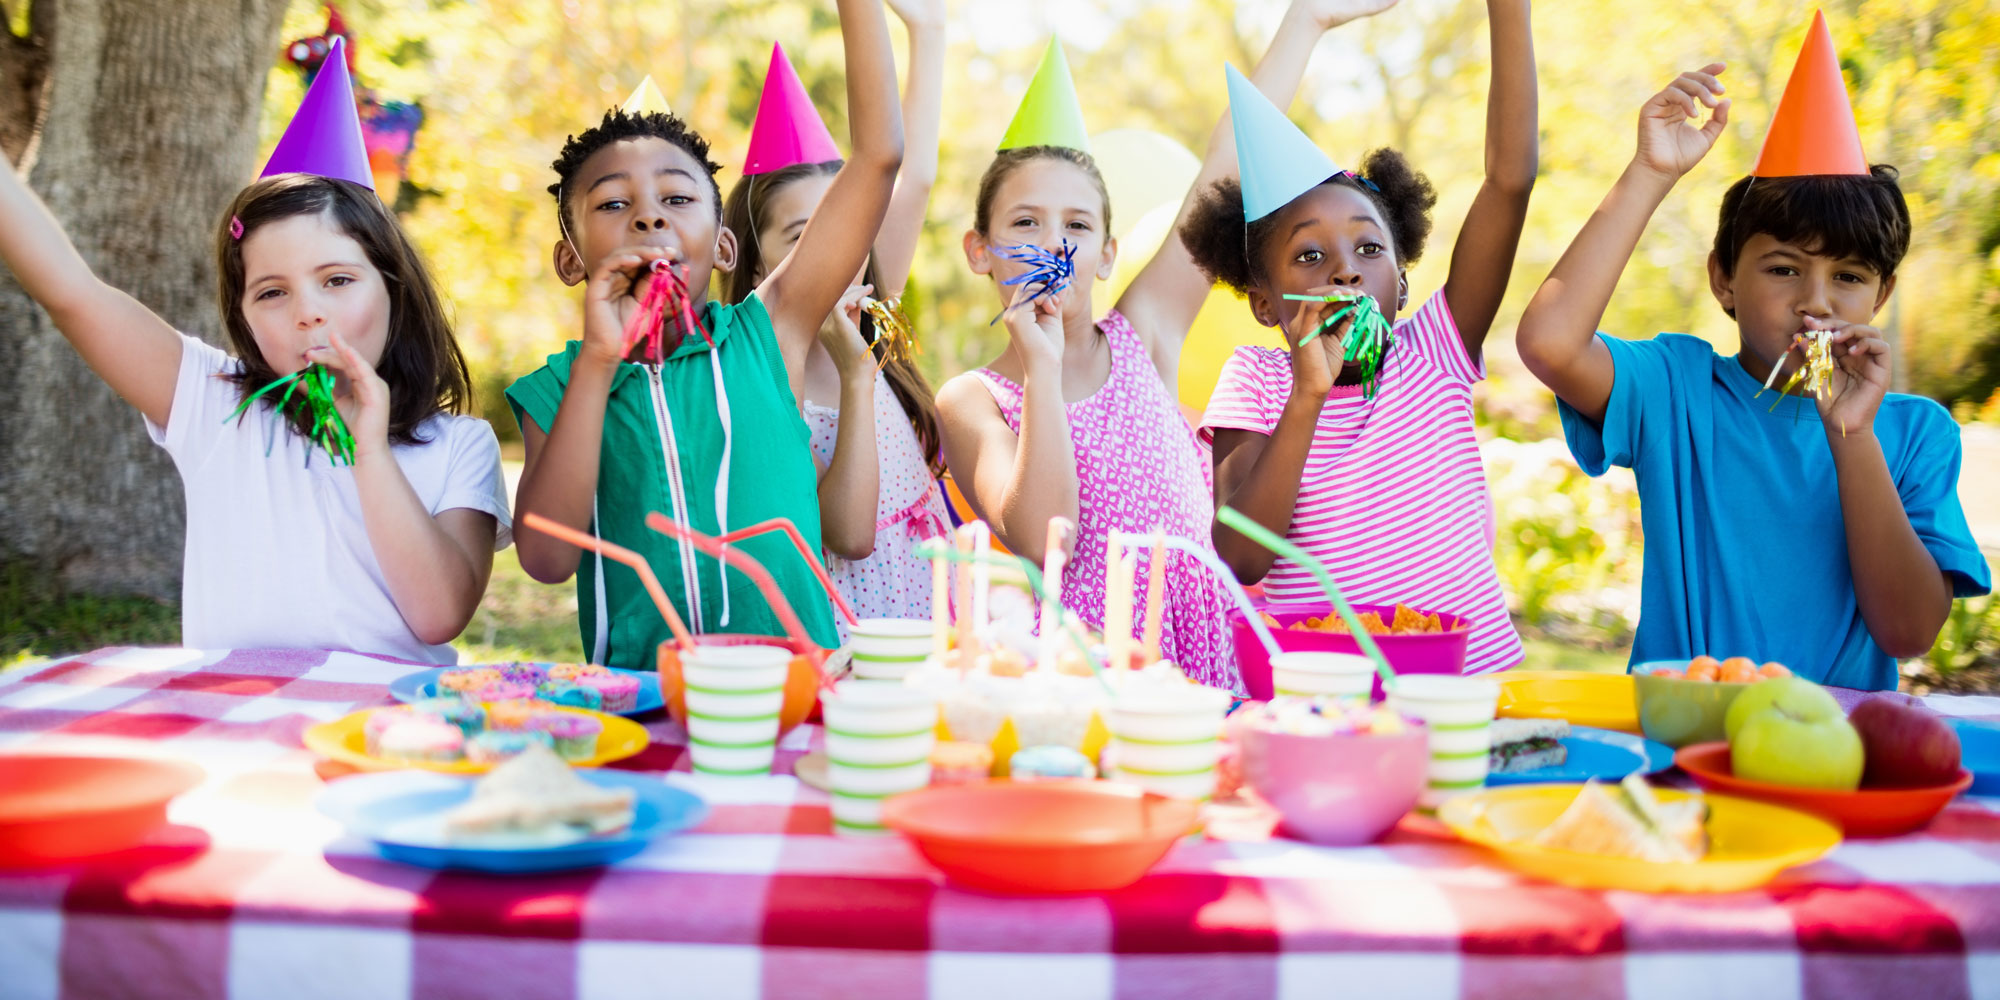 kids at a birthday party